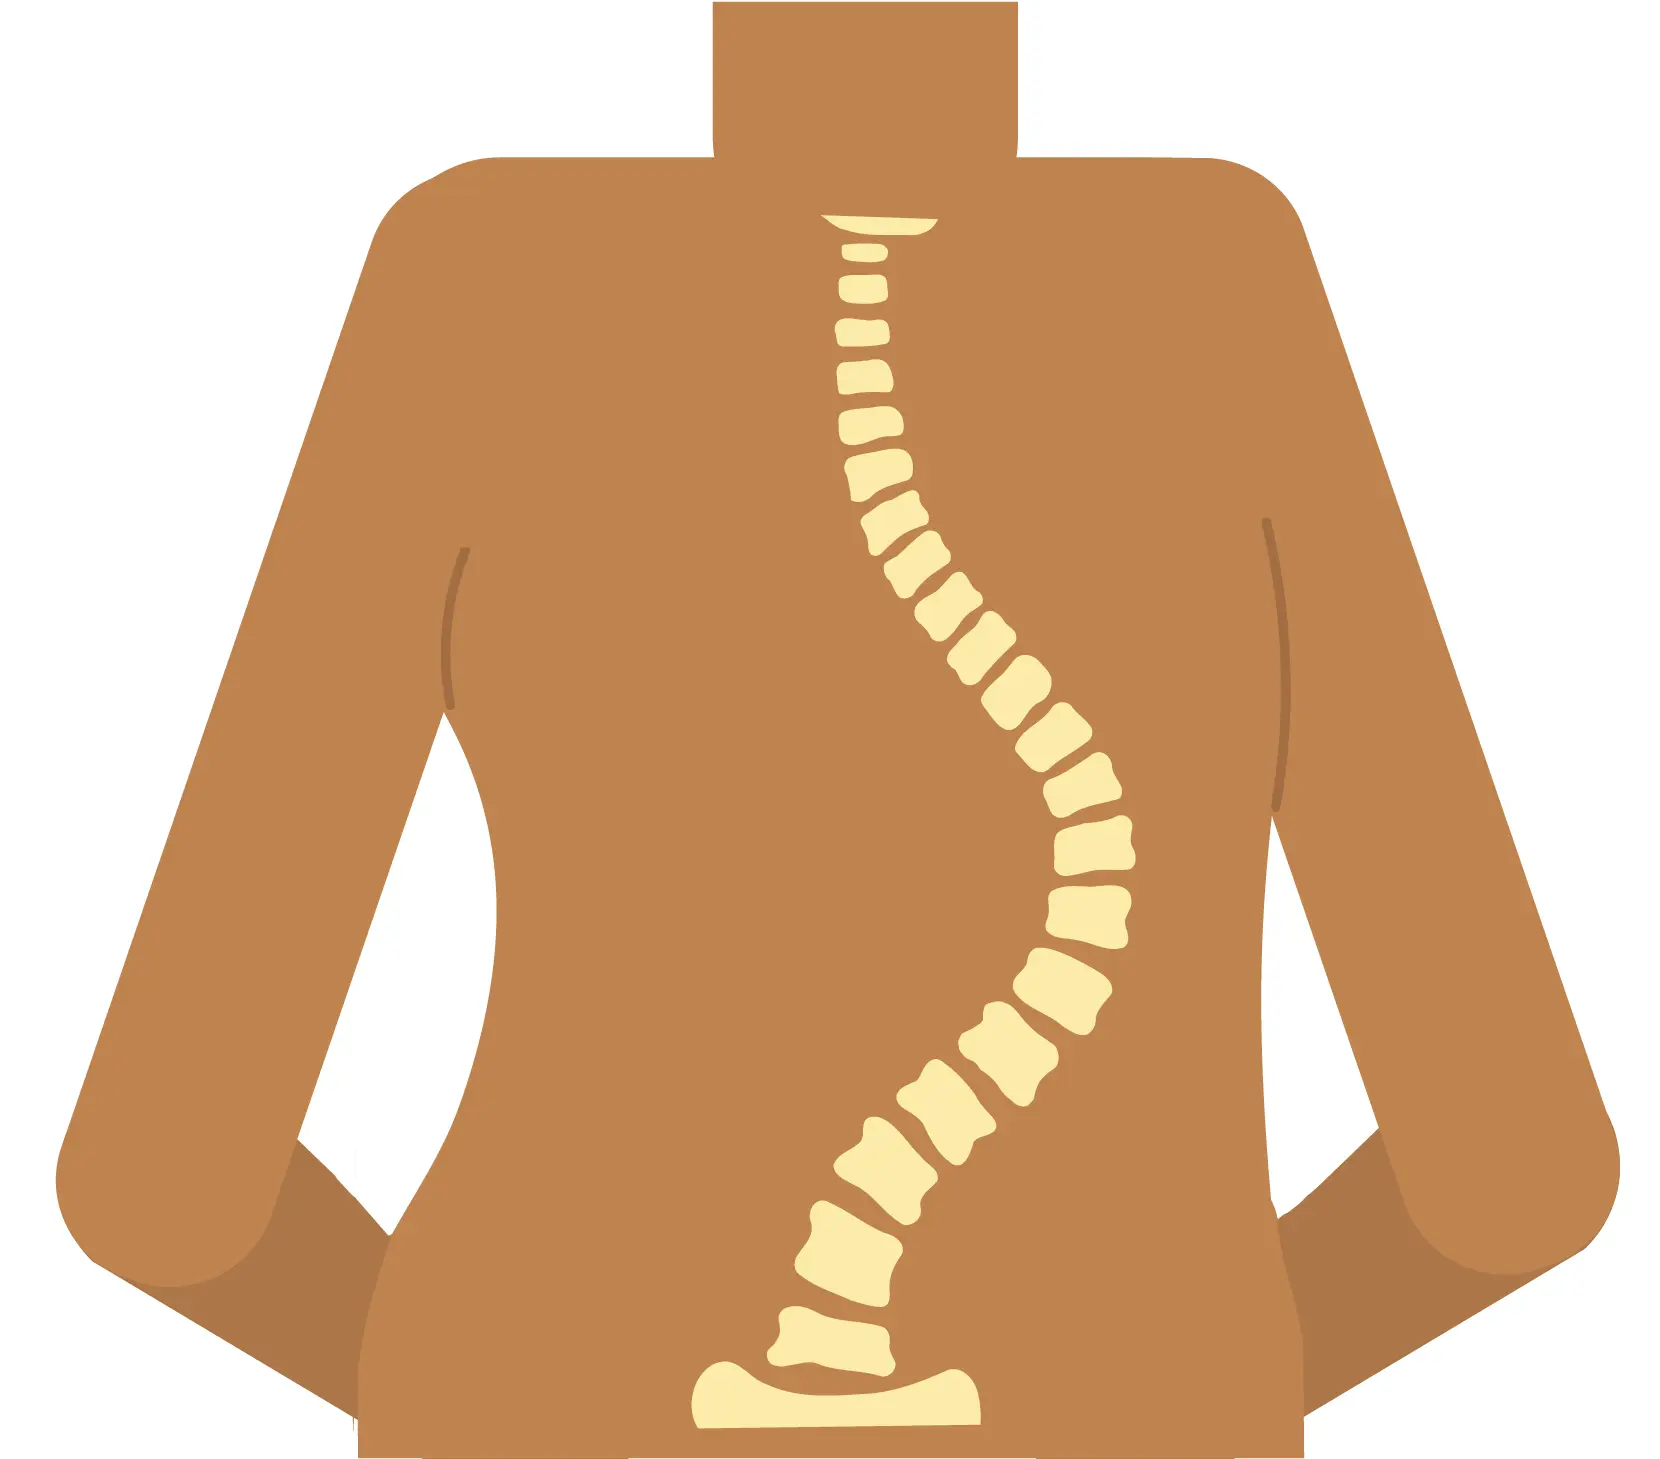 Scoliosis is a sideways curvature of the spine.